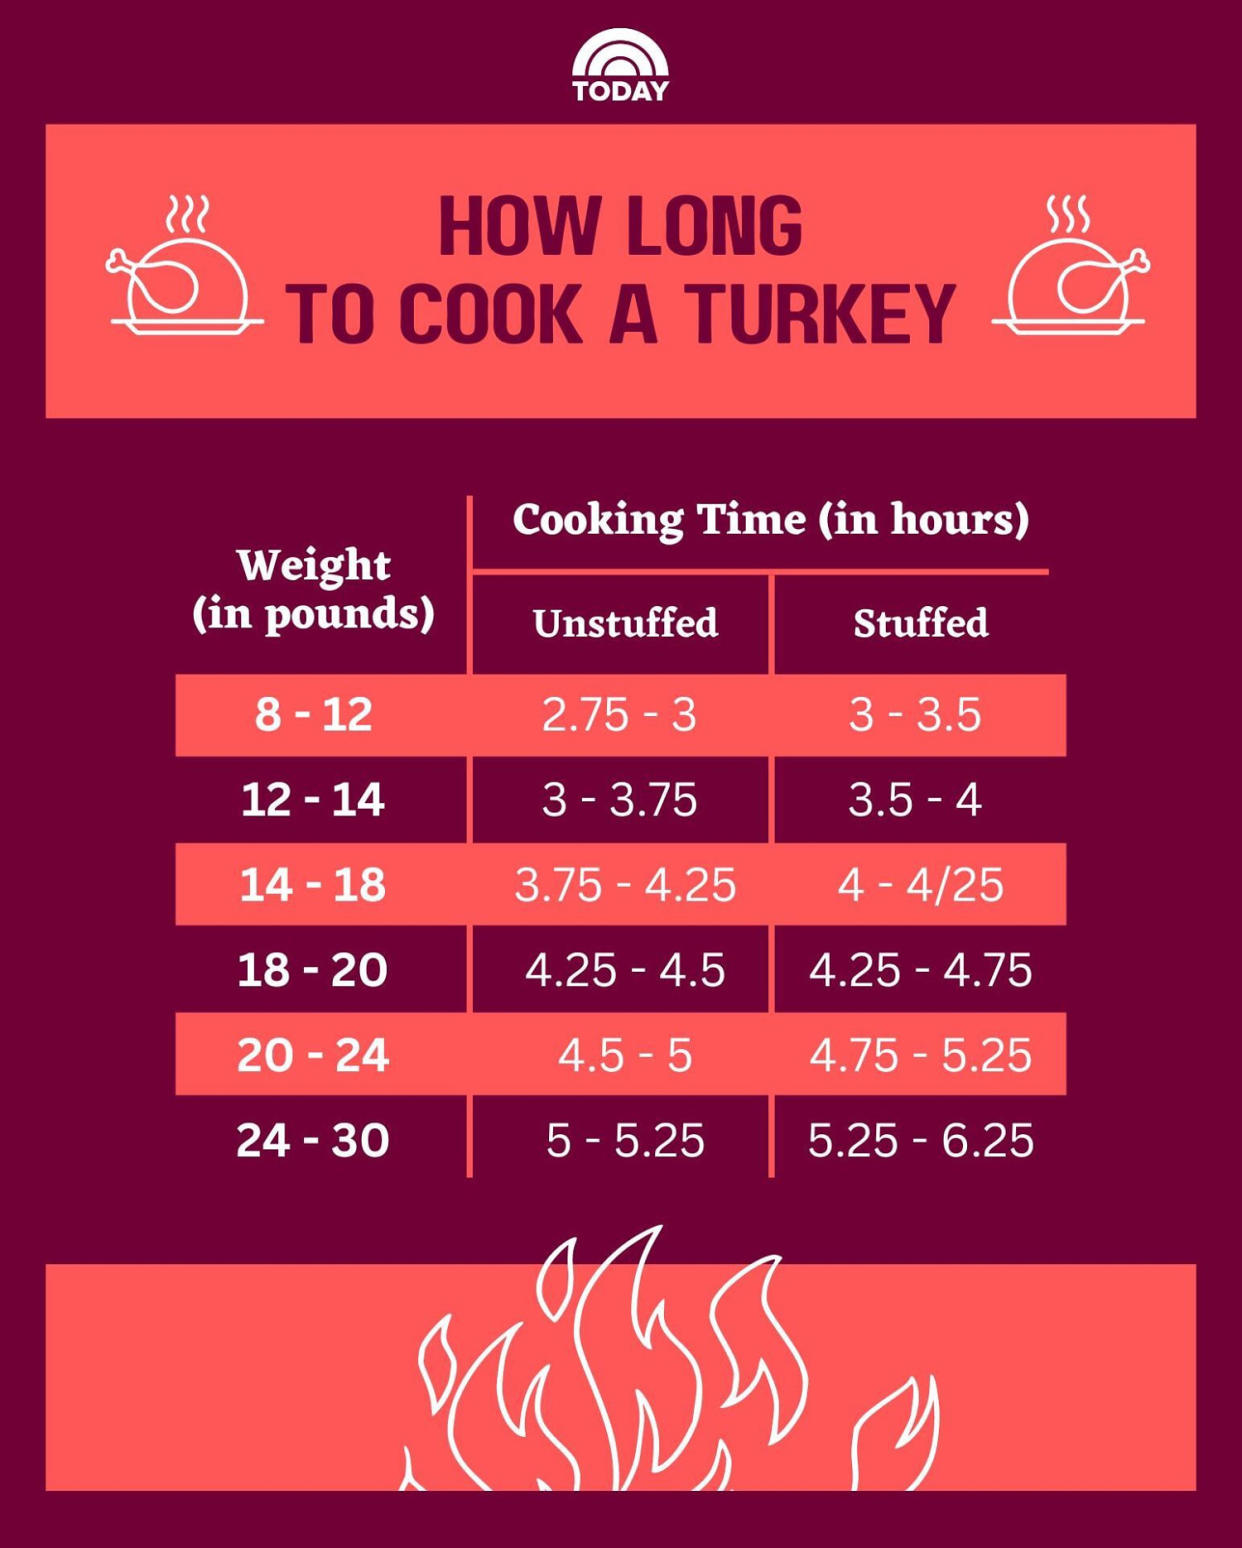 A table of turkey cooking times by weight in pounds and whether the turkey is stuffed or unstuffed. (Liza Evseeva / NBC News)